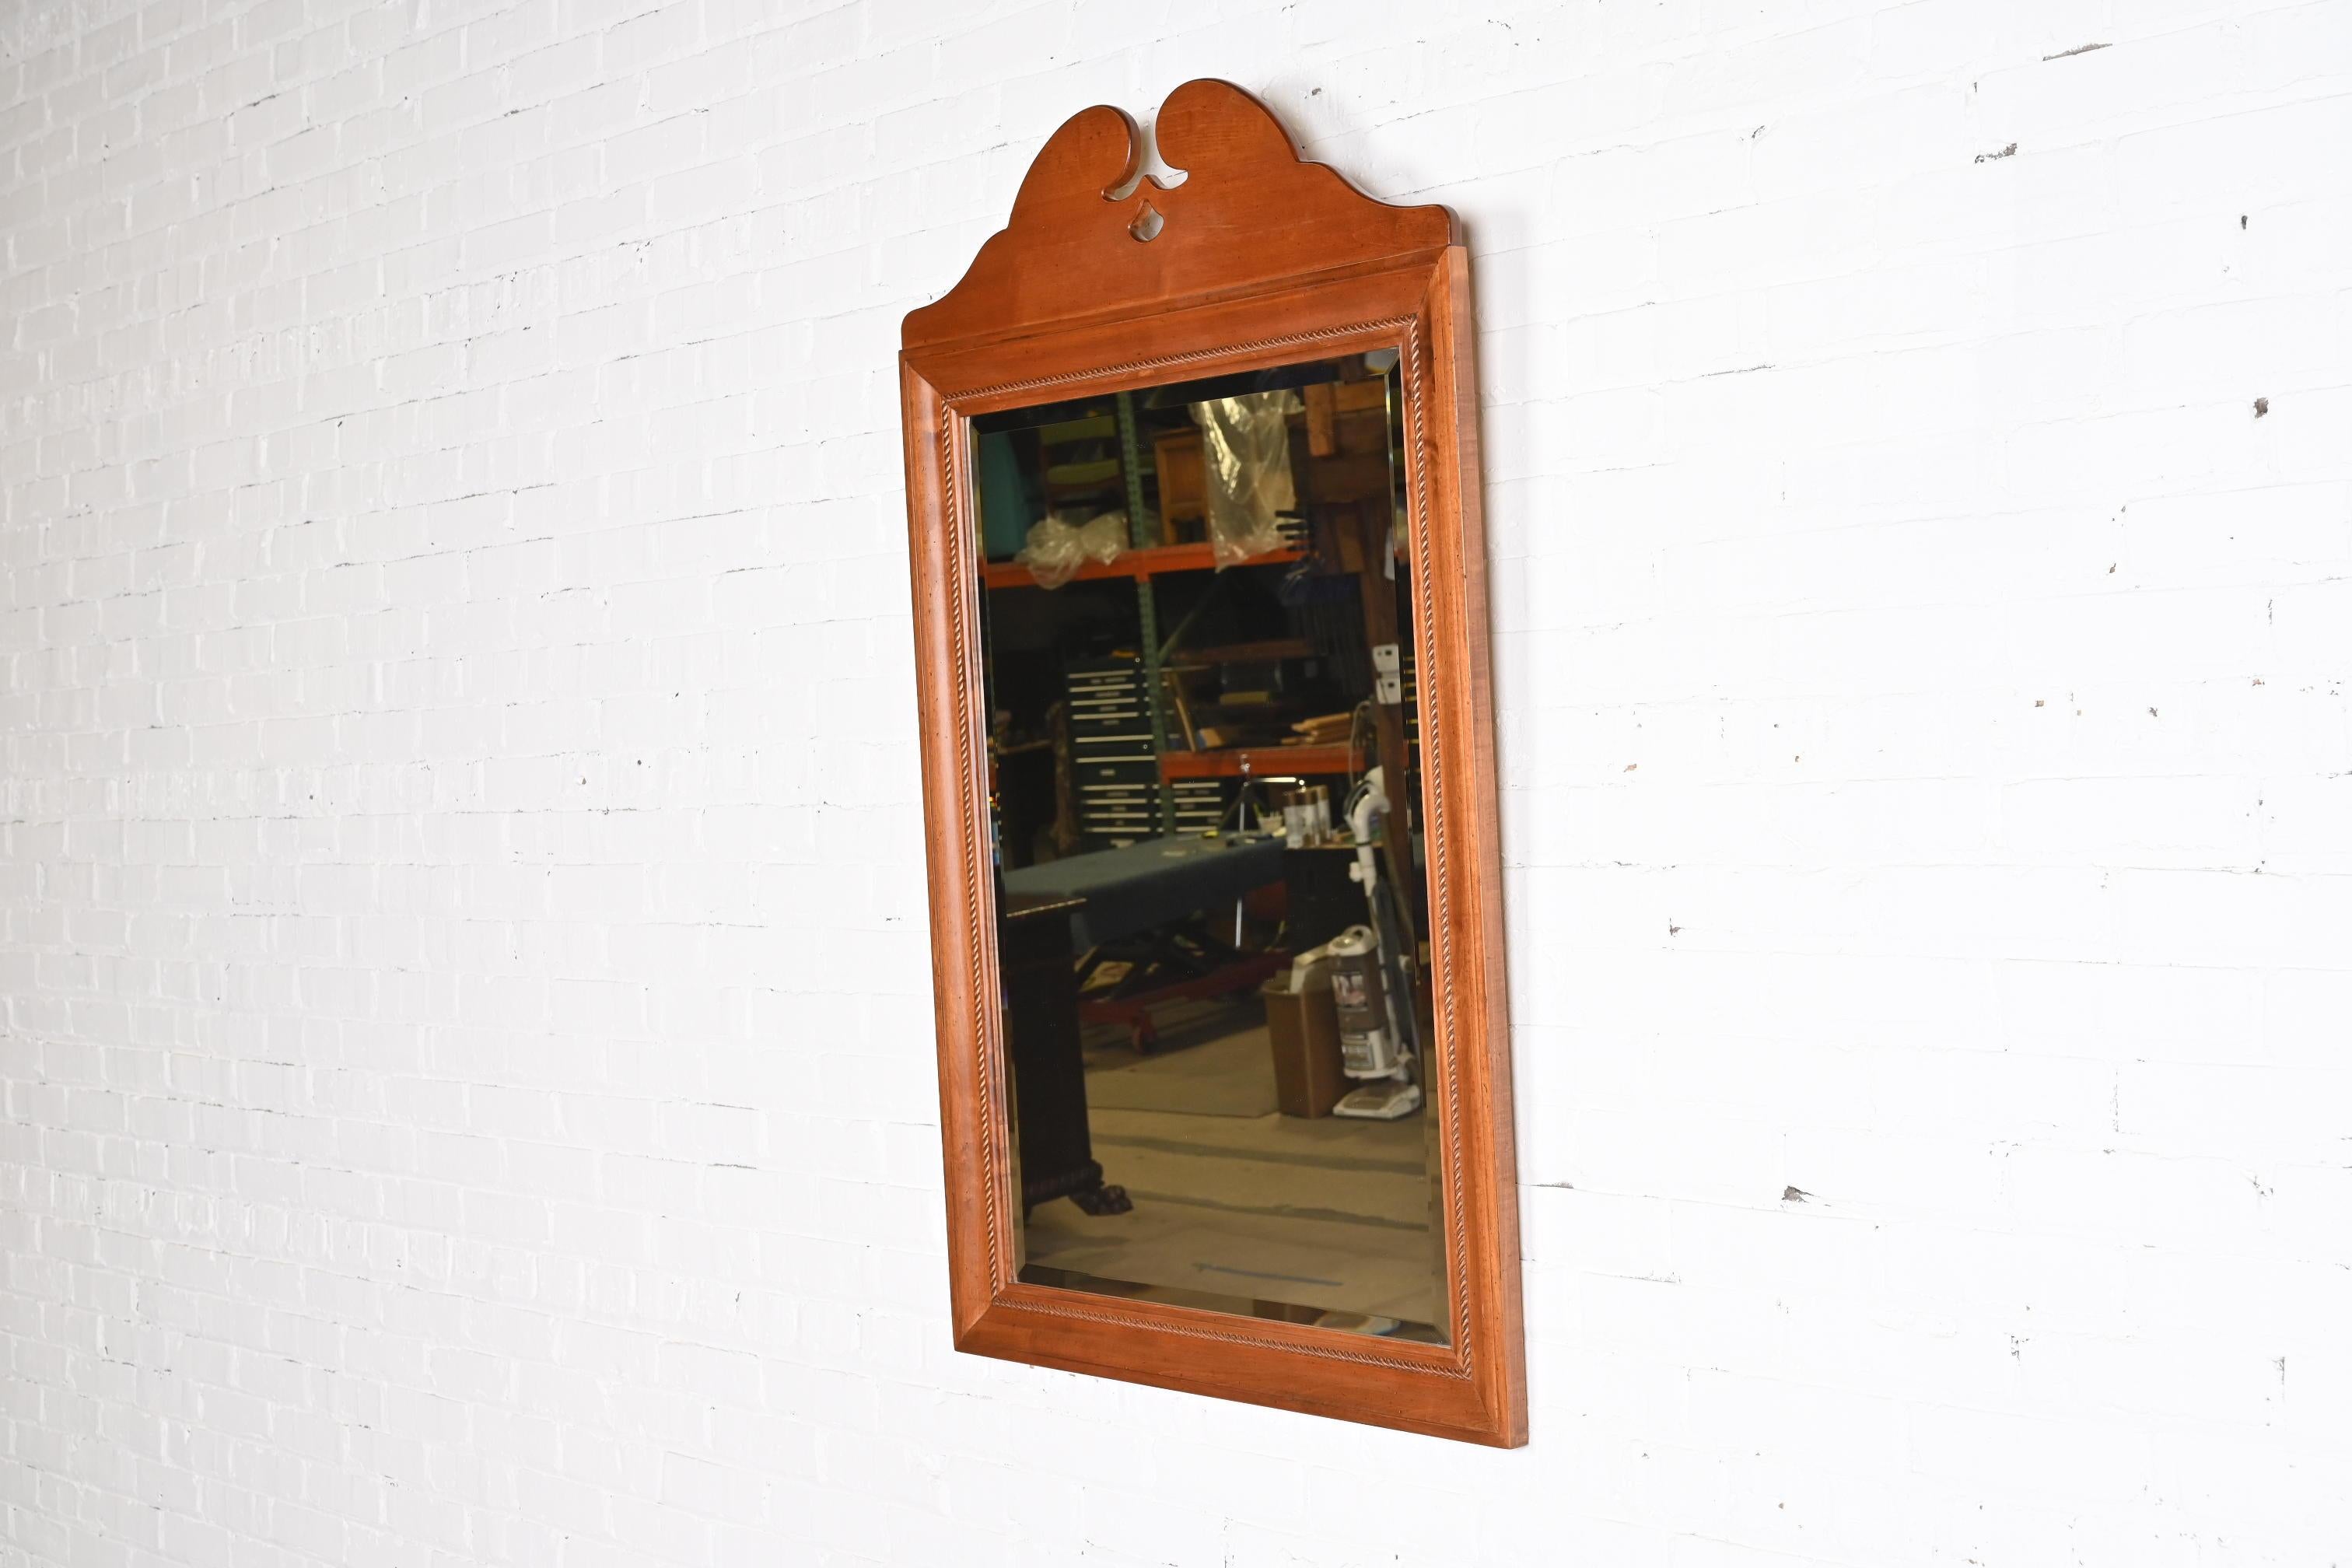 Early American Carved Maple Framed Beveled Wall Mirror In Good Condition For Sale In South Bend, IN